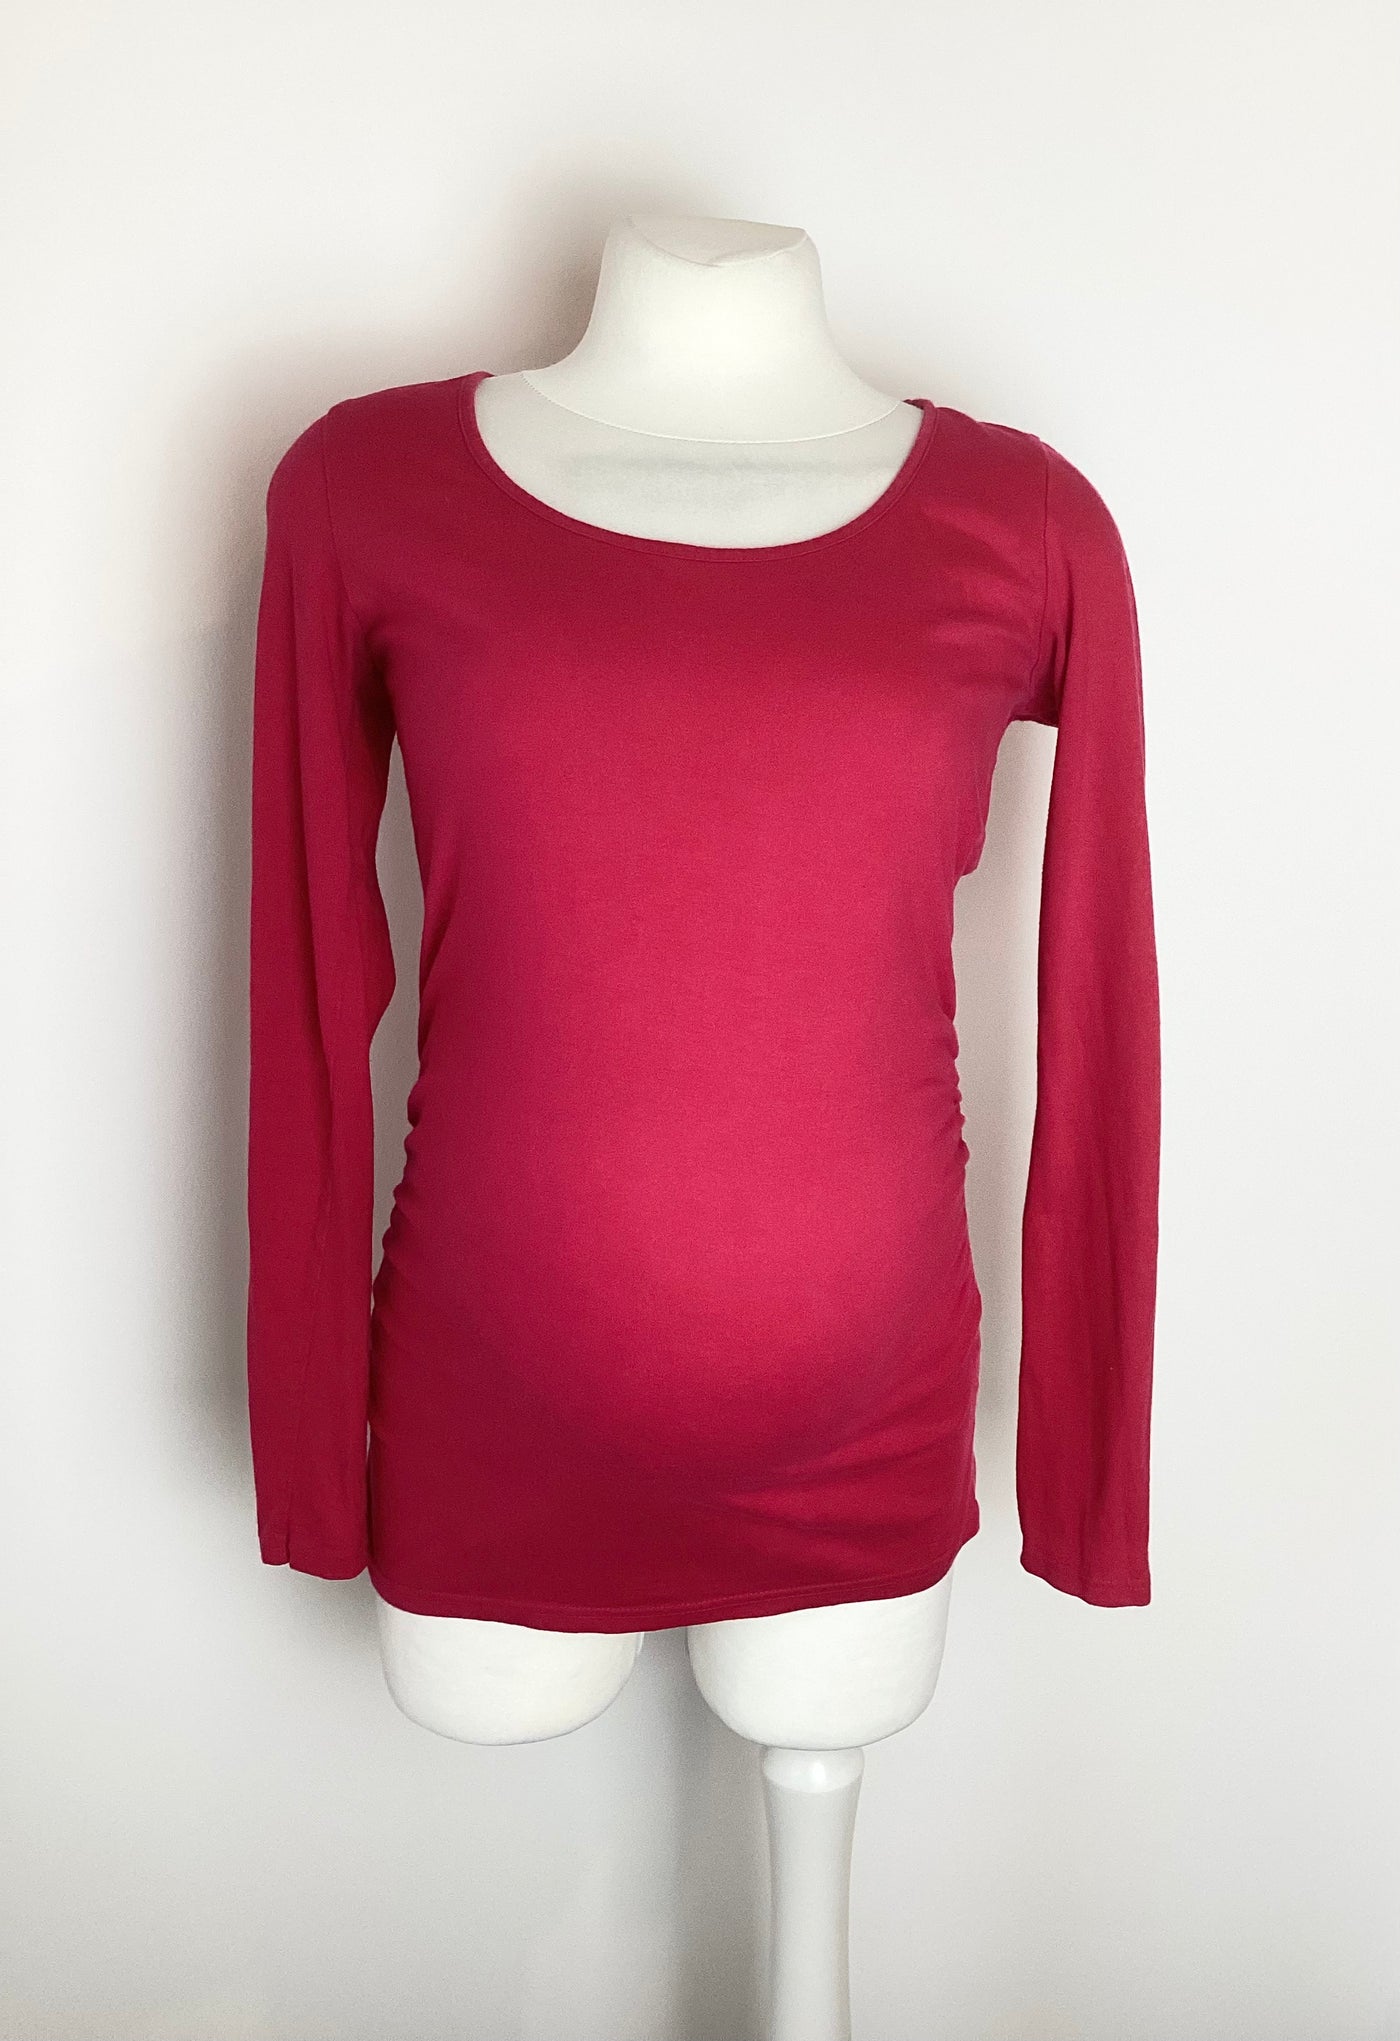 Dorothy Perkins Maternity cerise pink long sleeved top - Size 8